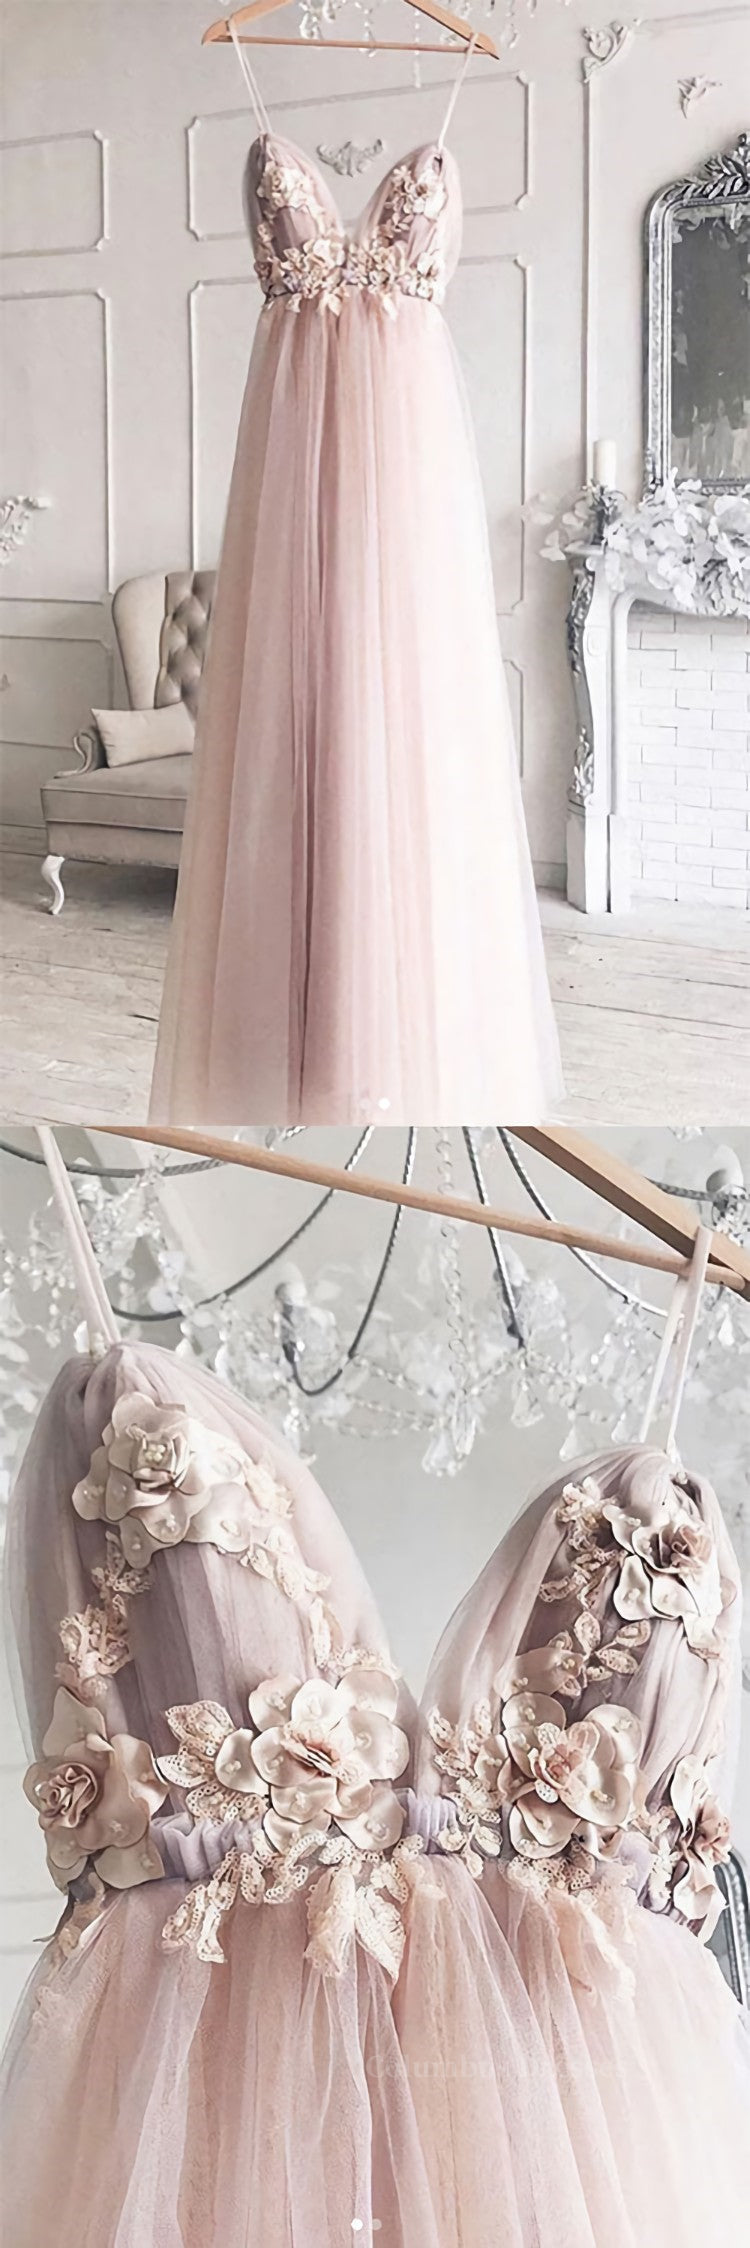 Formal Dress Ballgown, Sweetheart tulle lace long prom dress, tulle lace evening dress